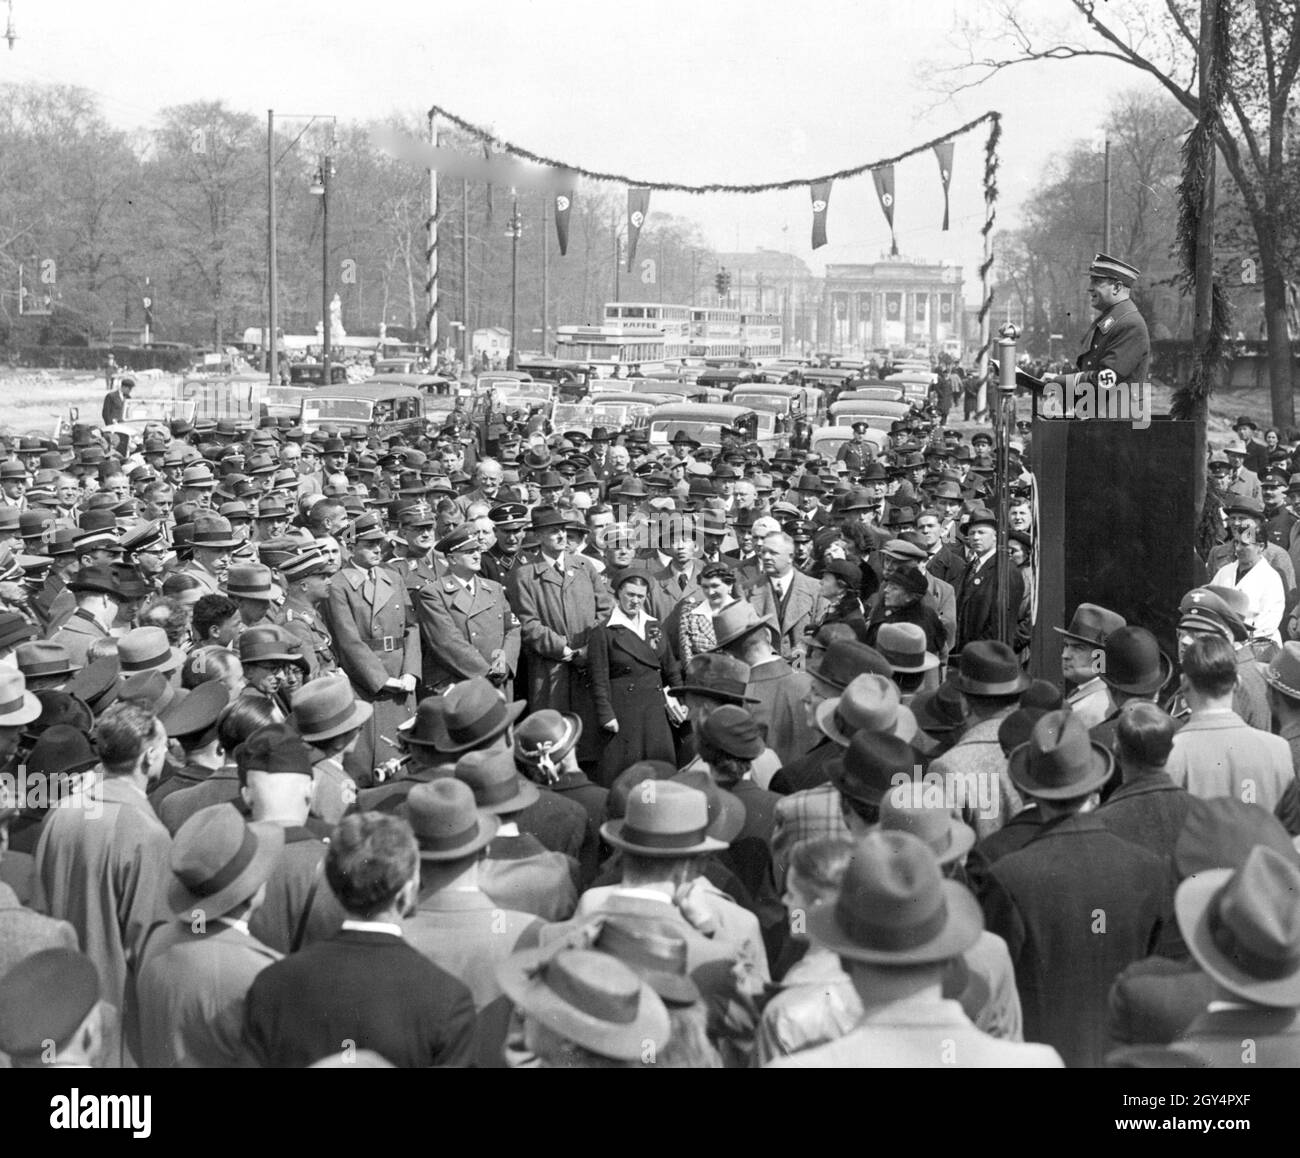 An SA group leader speaks to a large crowd on the East-West axis (today: Straße des 17. Juni) in Berlin-Mitte in 1939. In the audience are members of NSDAP organizations such as the SA or SS. In the background you can see the Brandenburg Gate hung with swastika flags. [automated translation] Stock Photo